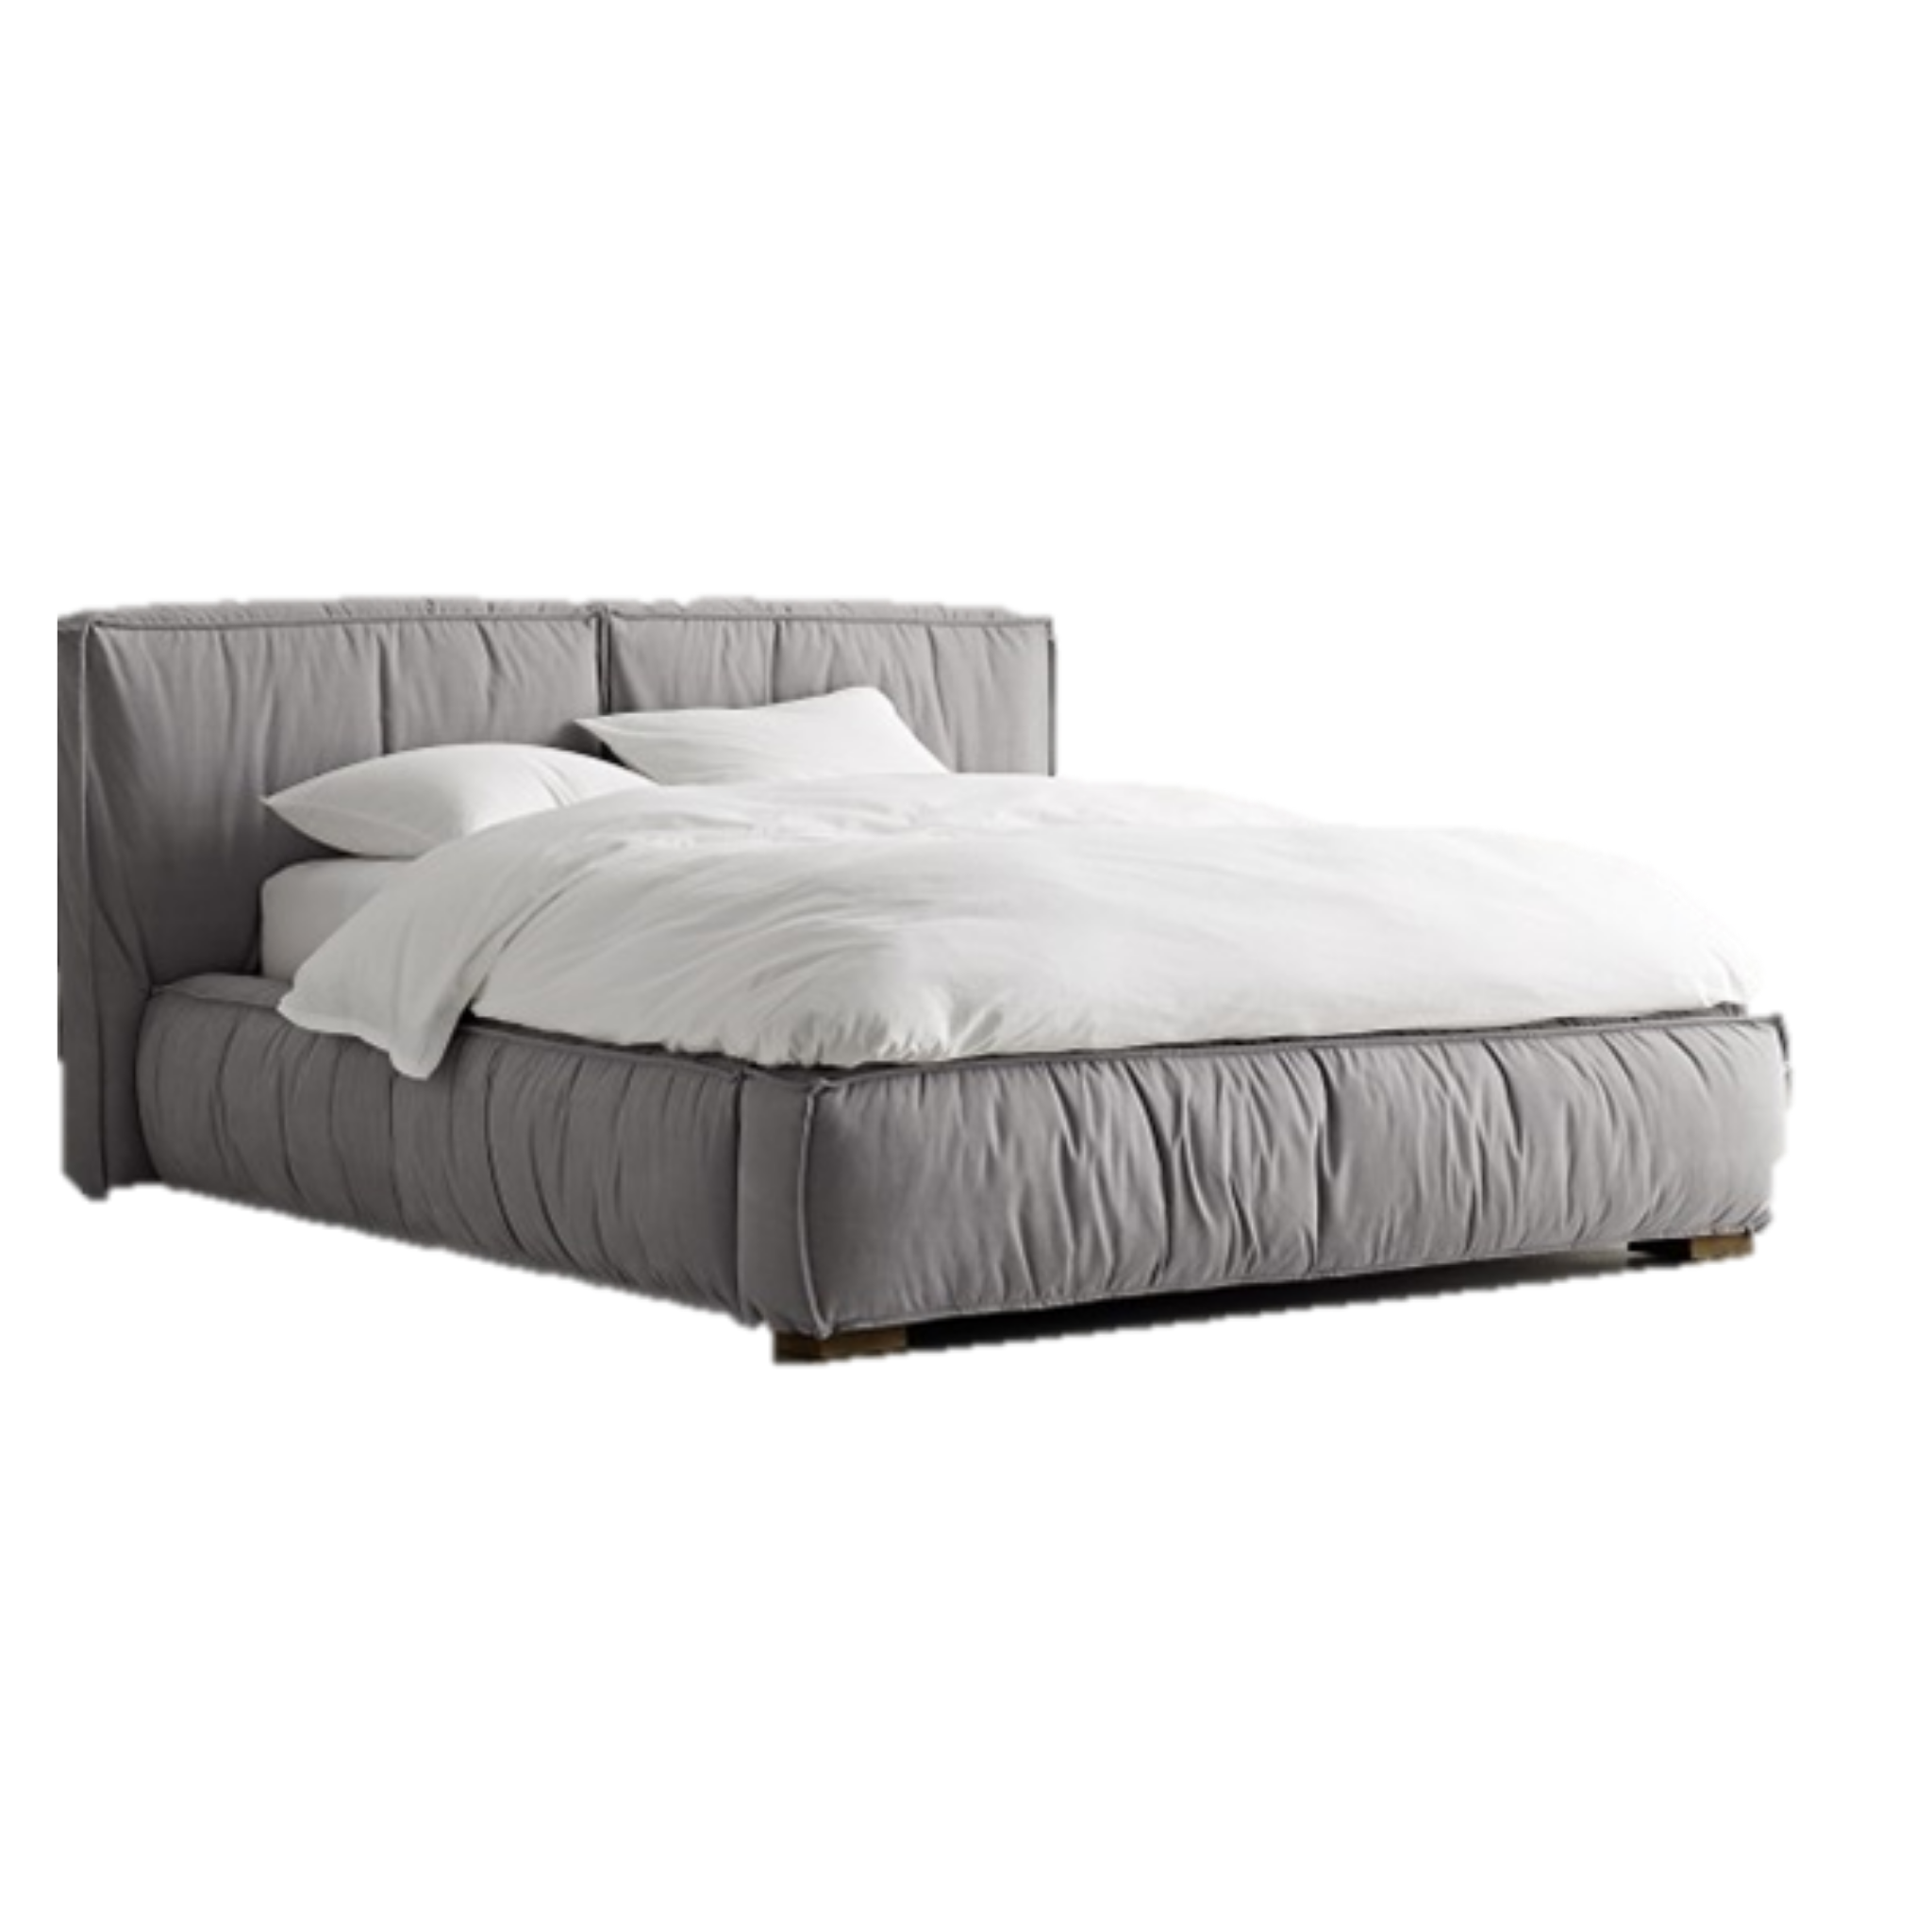 Dwell Bed